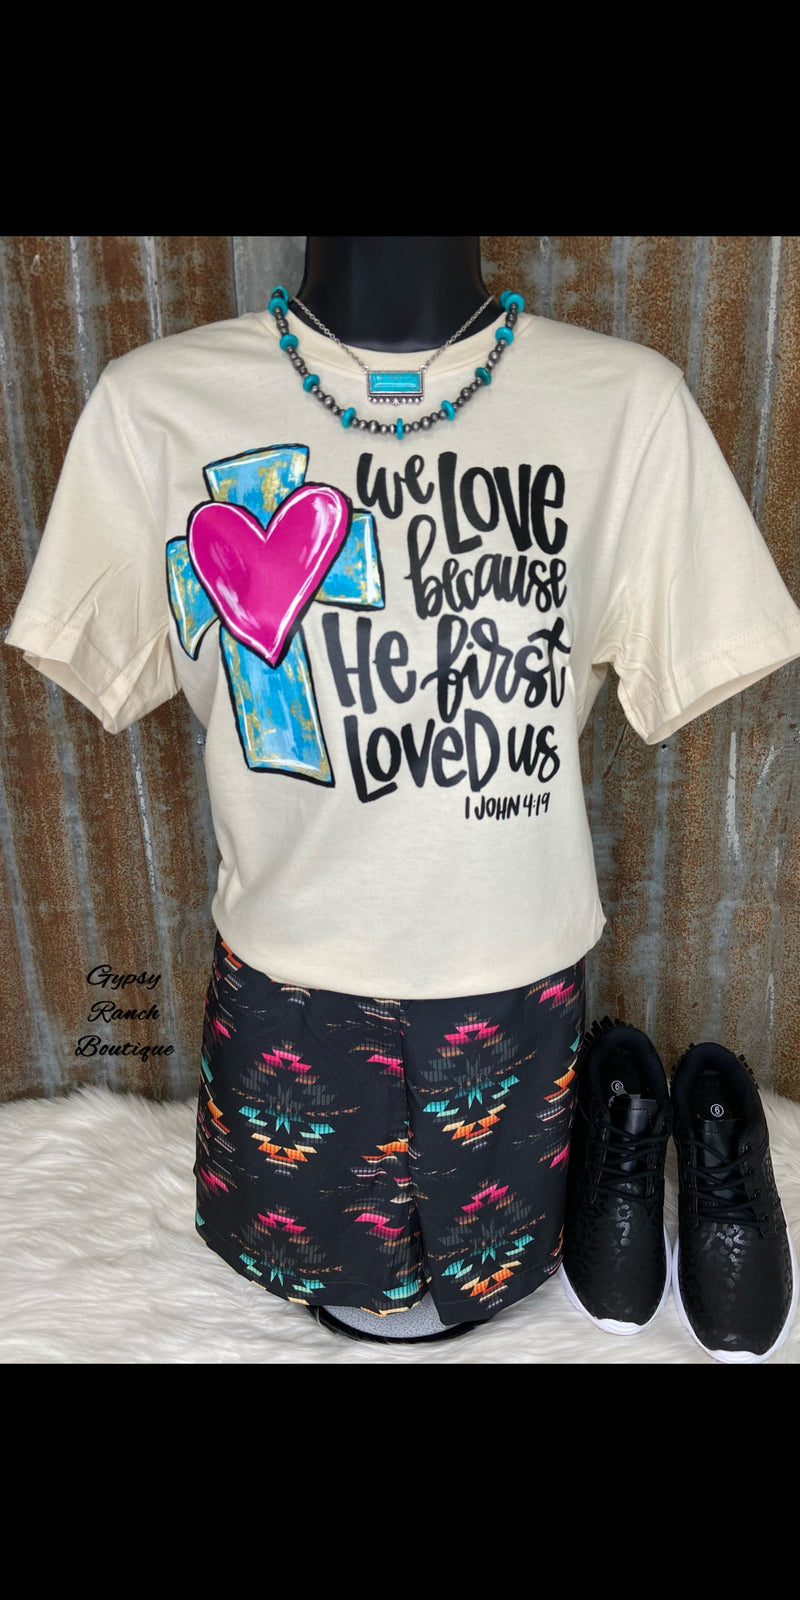 1 John 4:19 We Love Because He First Loved Us Top - Also in Plus Size